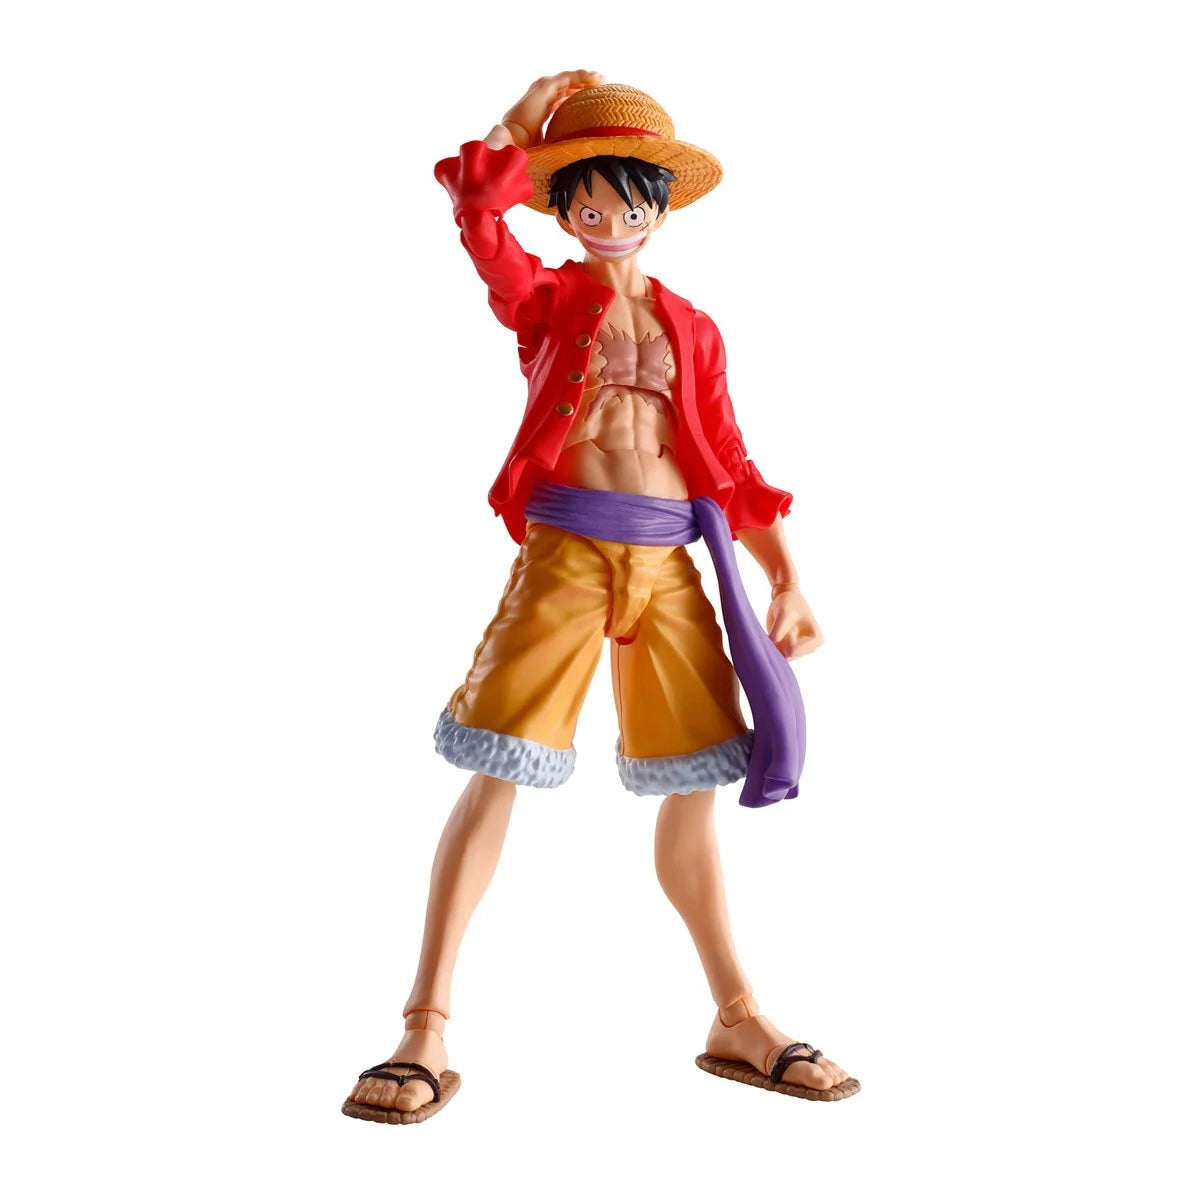 Shop One Piece  Toys, Bobbleheads, Statues & Collectibles in